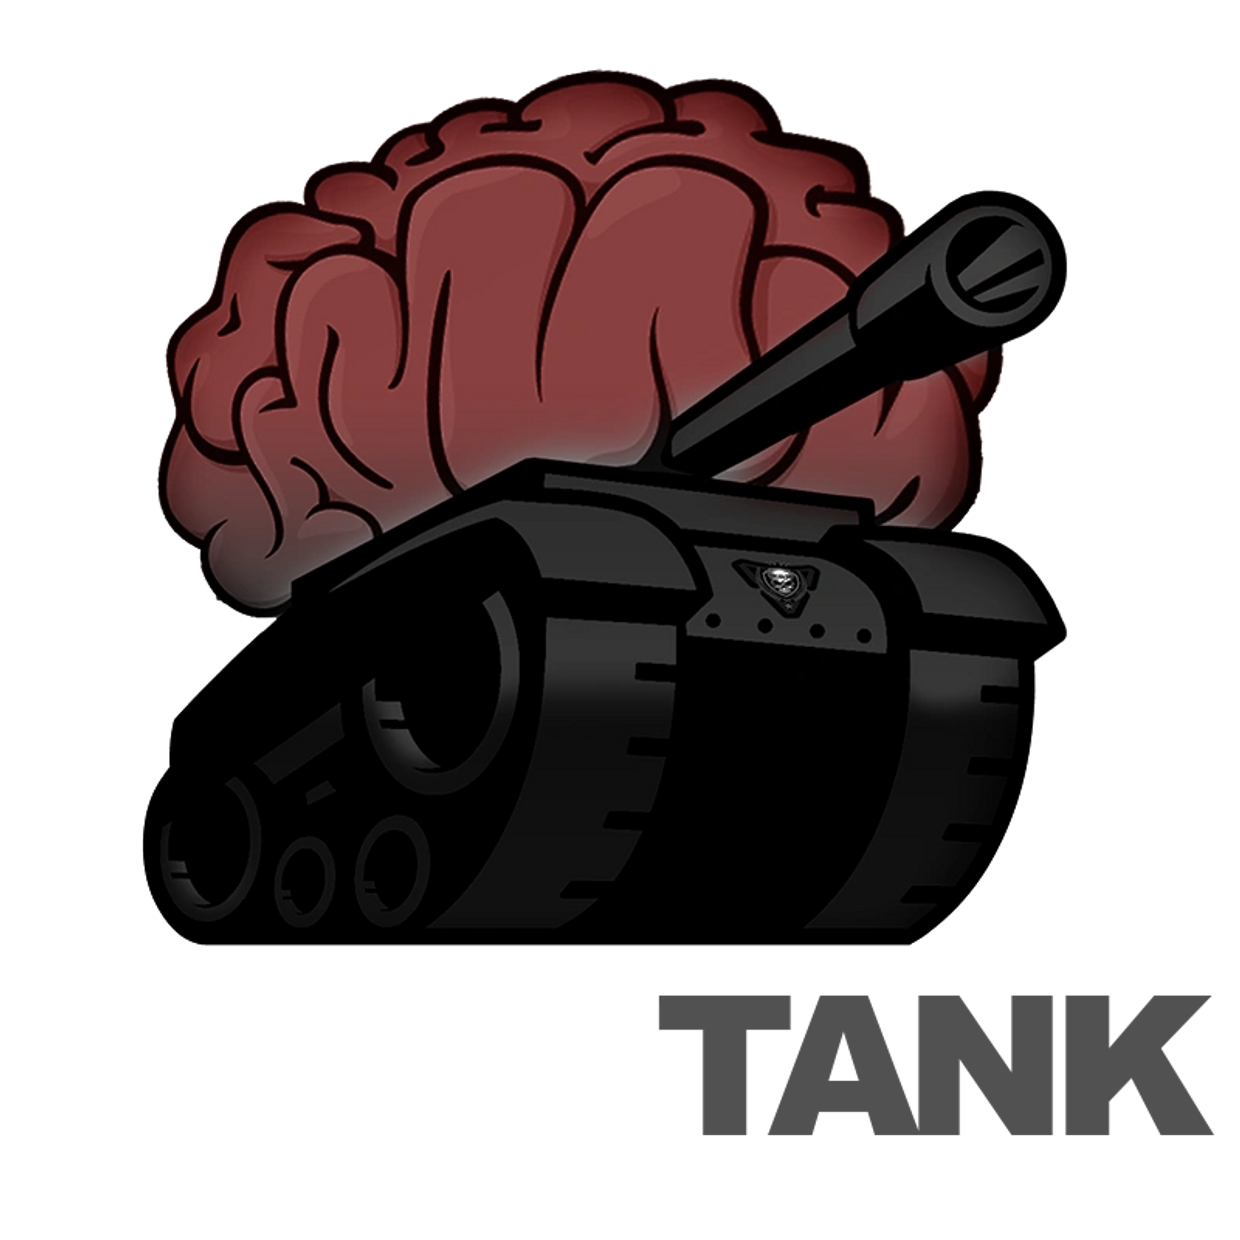 THINK TANK Logo & Trademark is Intellectual Property of Combat Edge Tactical Consultancy, Inc. 